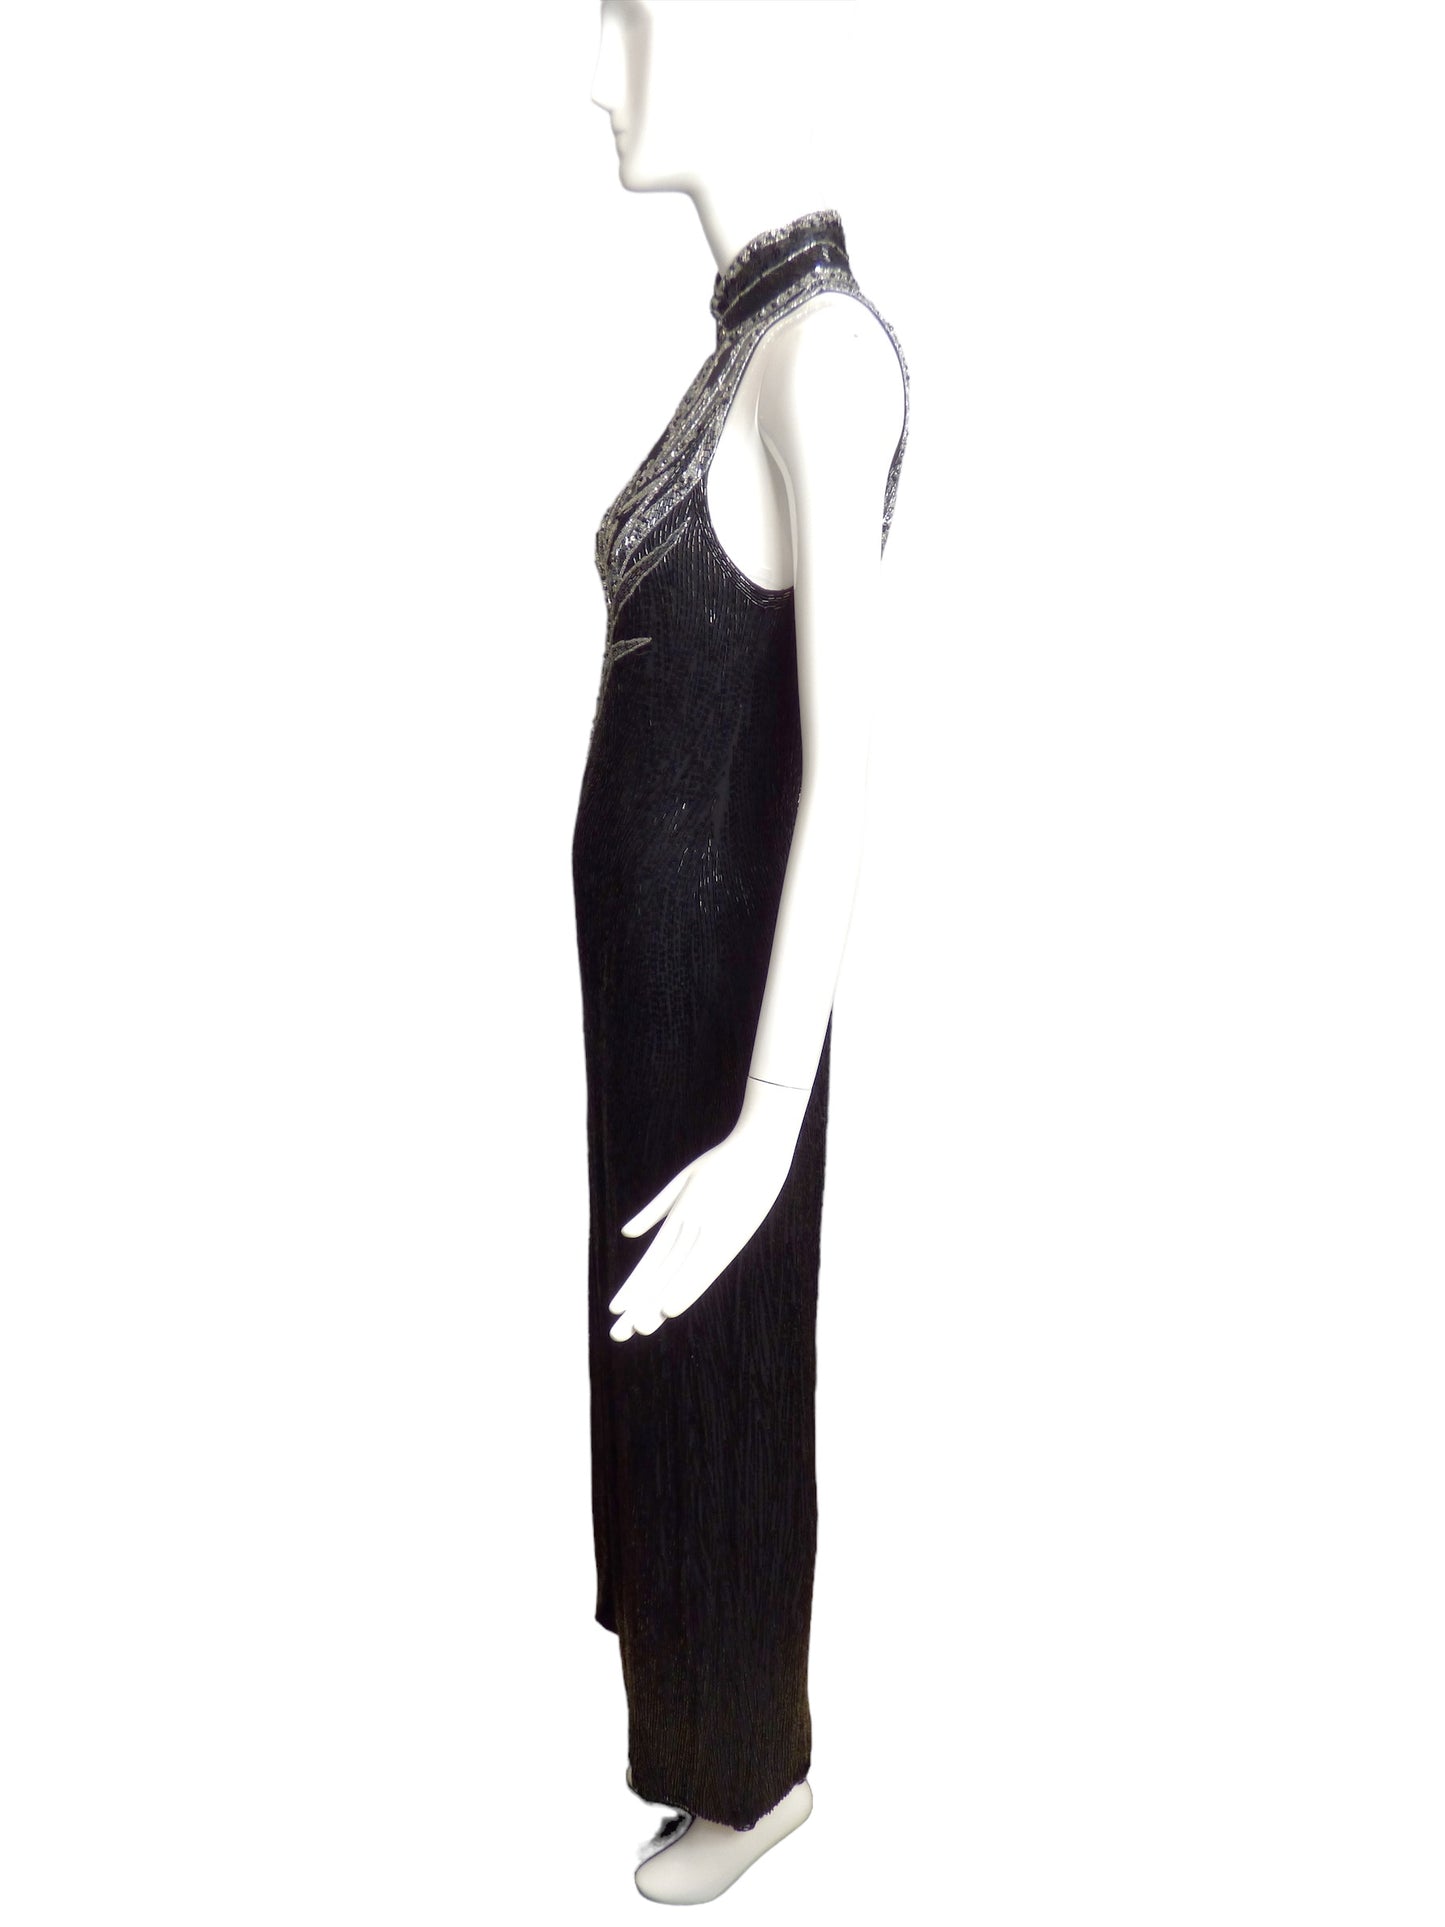 BOB MACKIE- 1990s Black & Silver Beaded Gown, Size 10